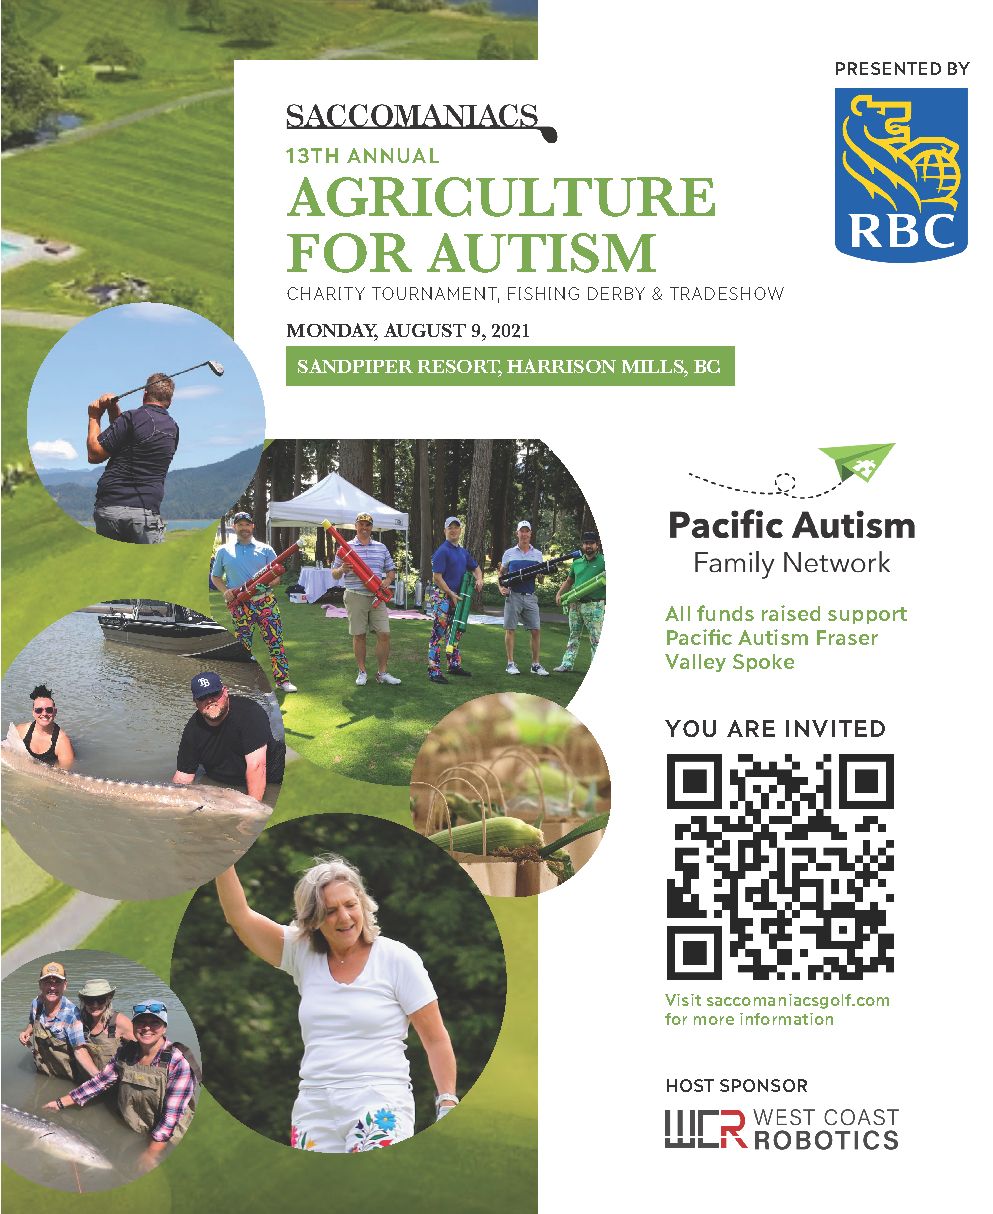 Agriculture for Autism Golf Tournament, Fishing Derby and Tradeshow - image